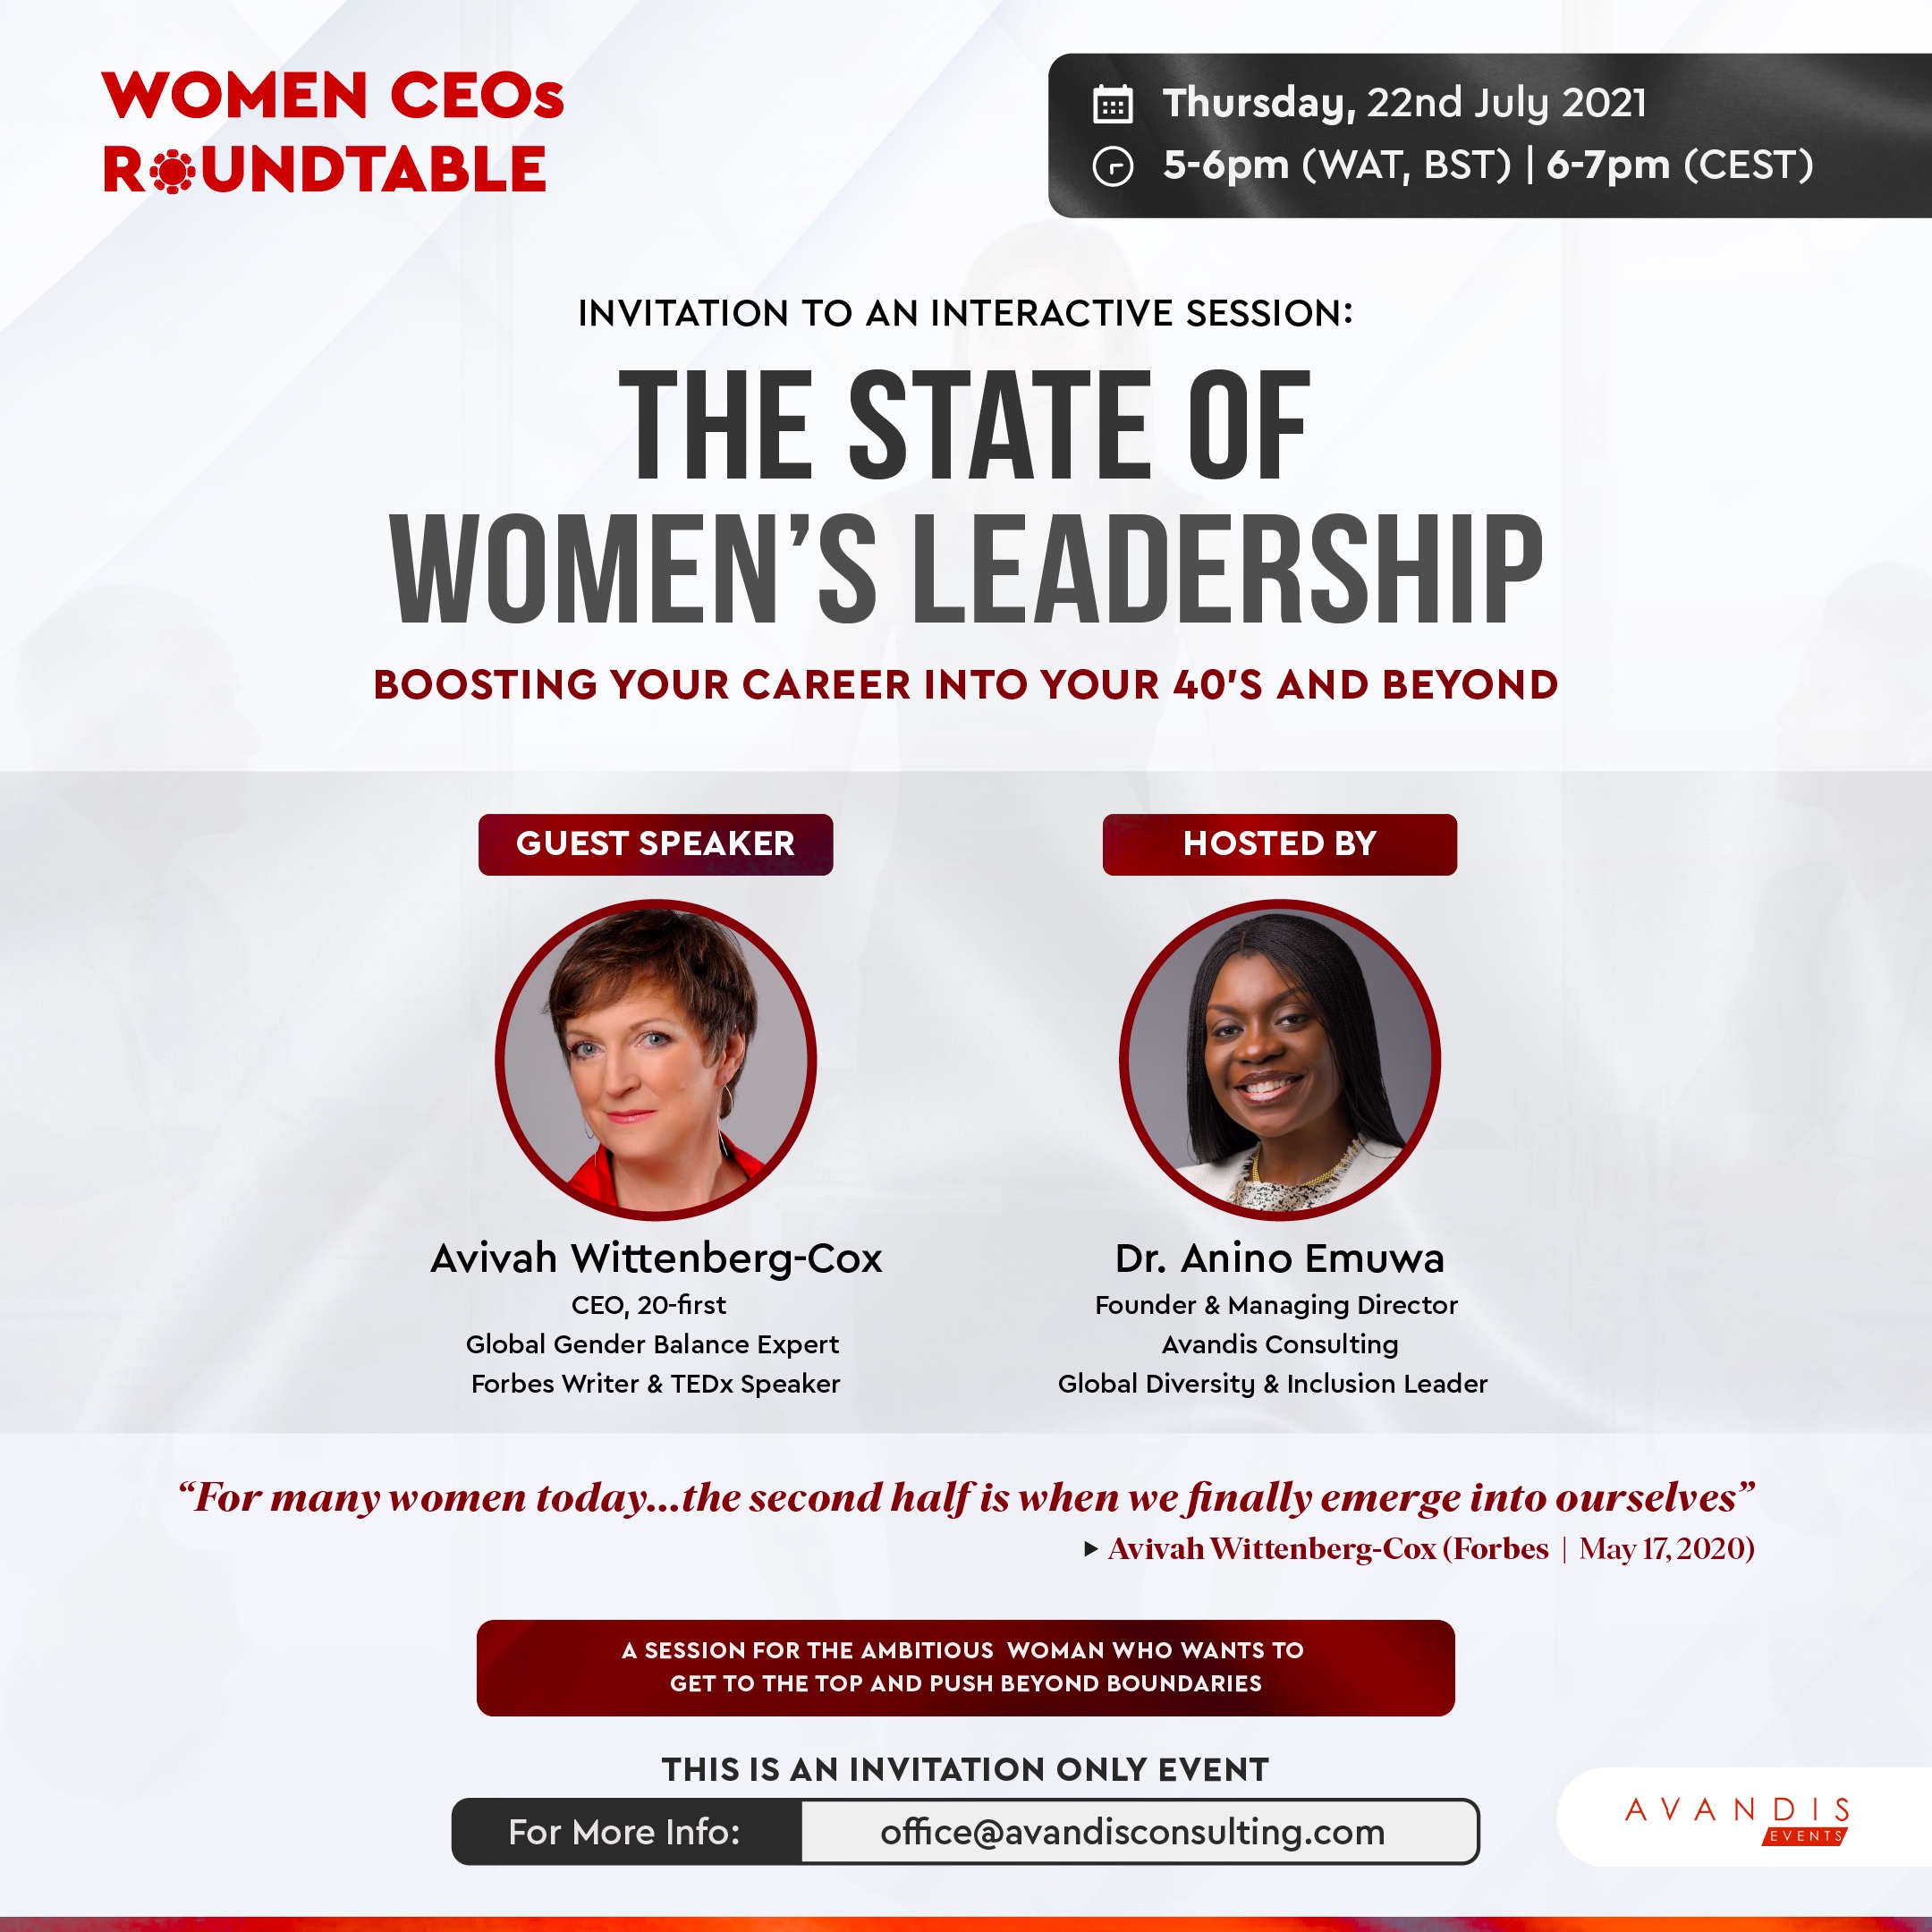 The State of Women's Leadership, roundtable event